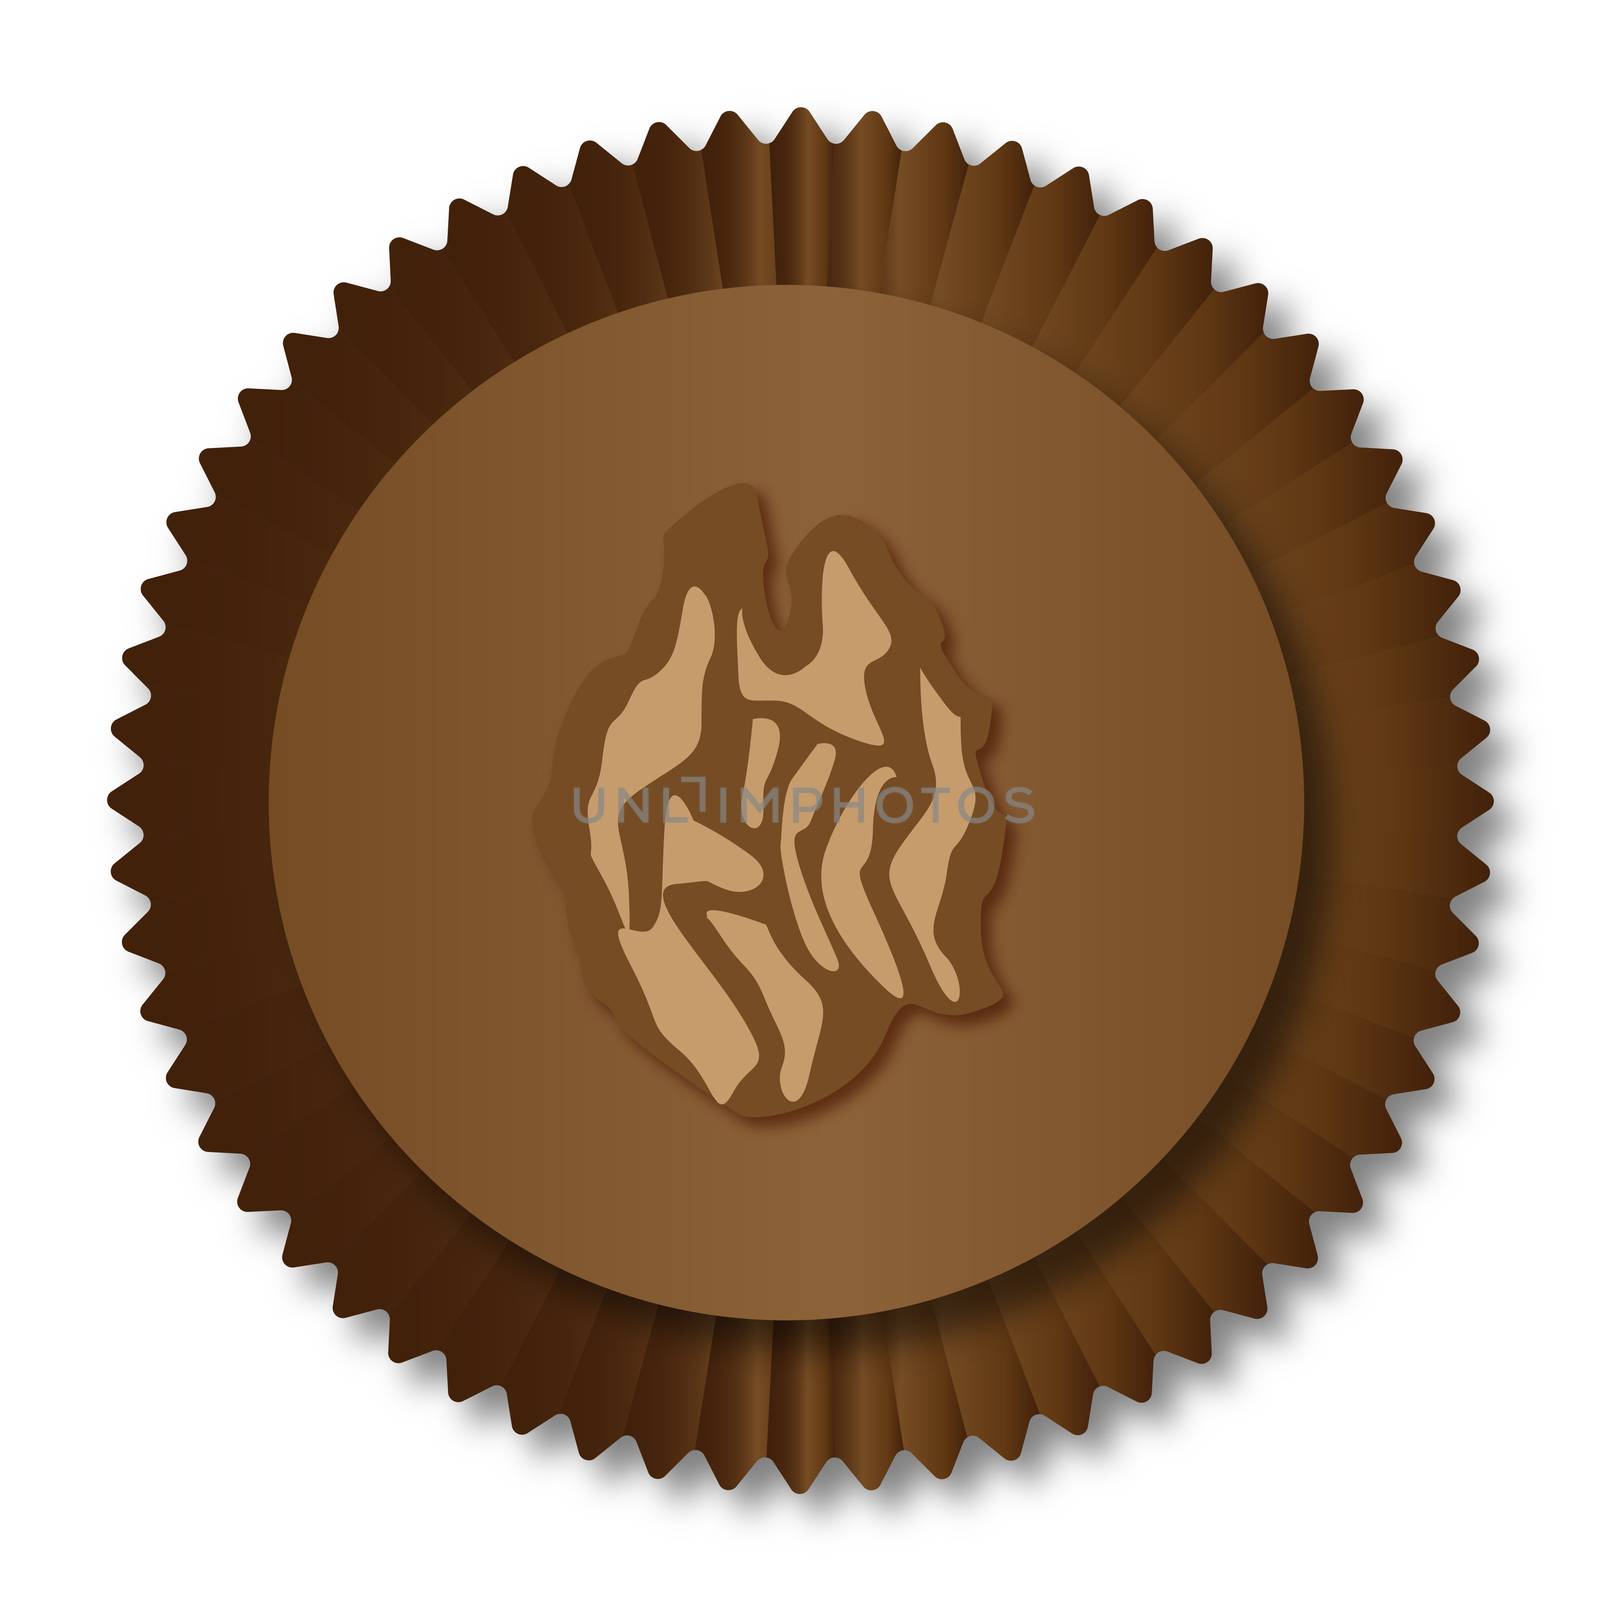 A typical wallnut chocolate from a chocolate box selextion over a white background